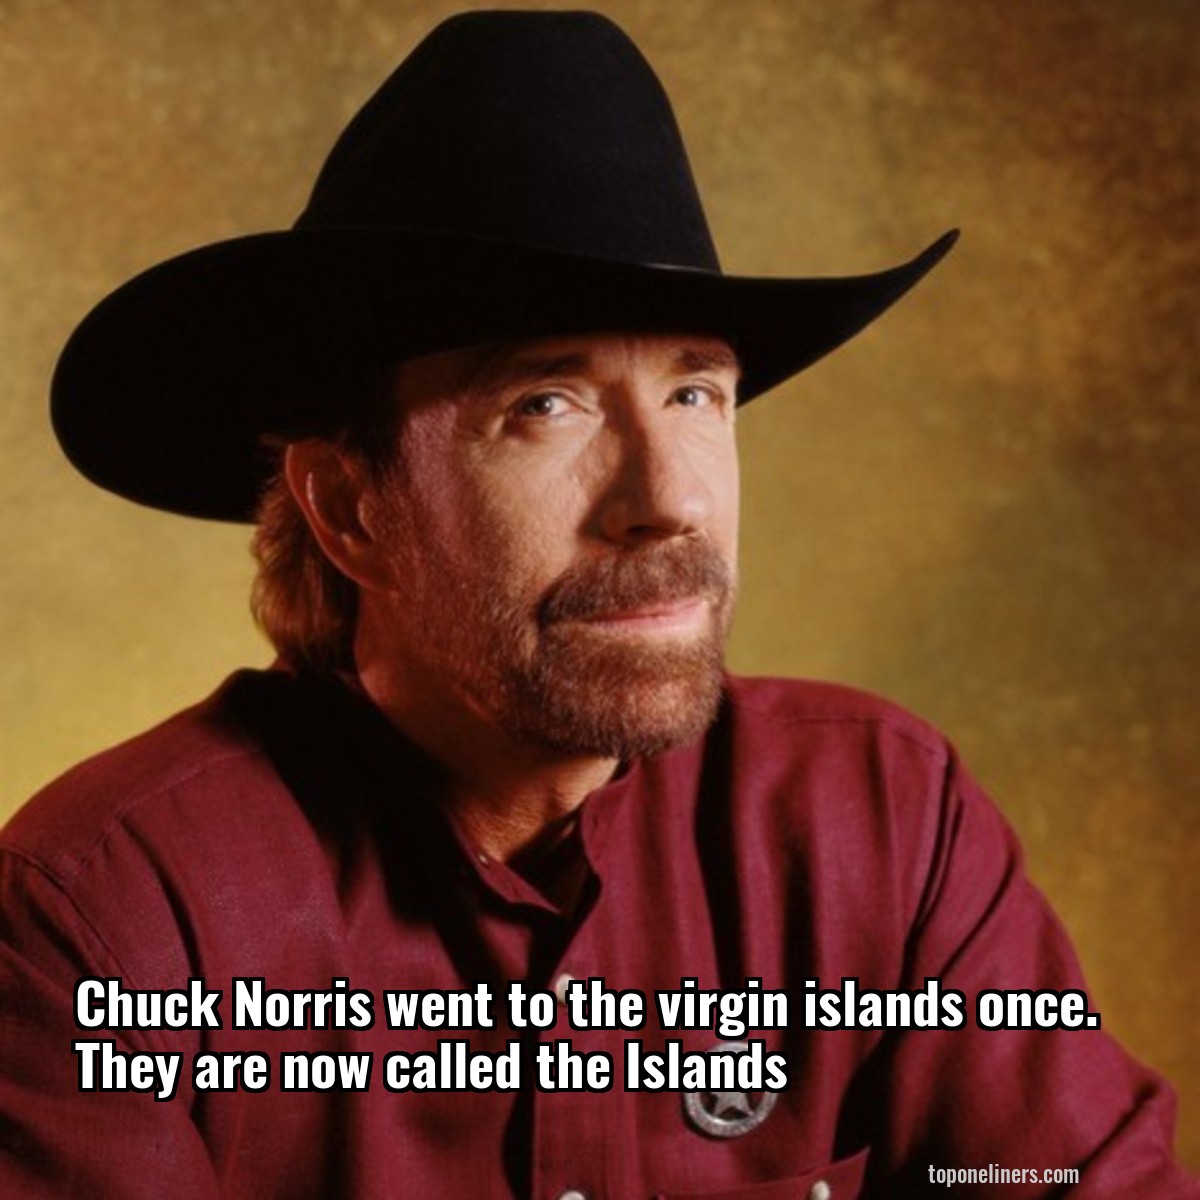 Chuck Norris went to the virgin islands once. They are now called the Islands